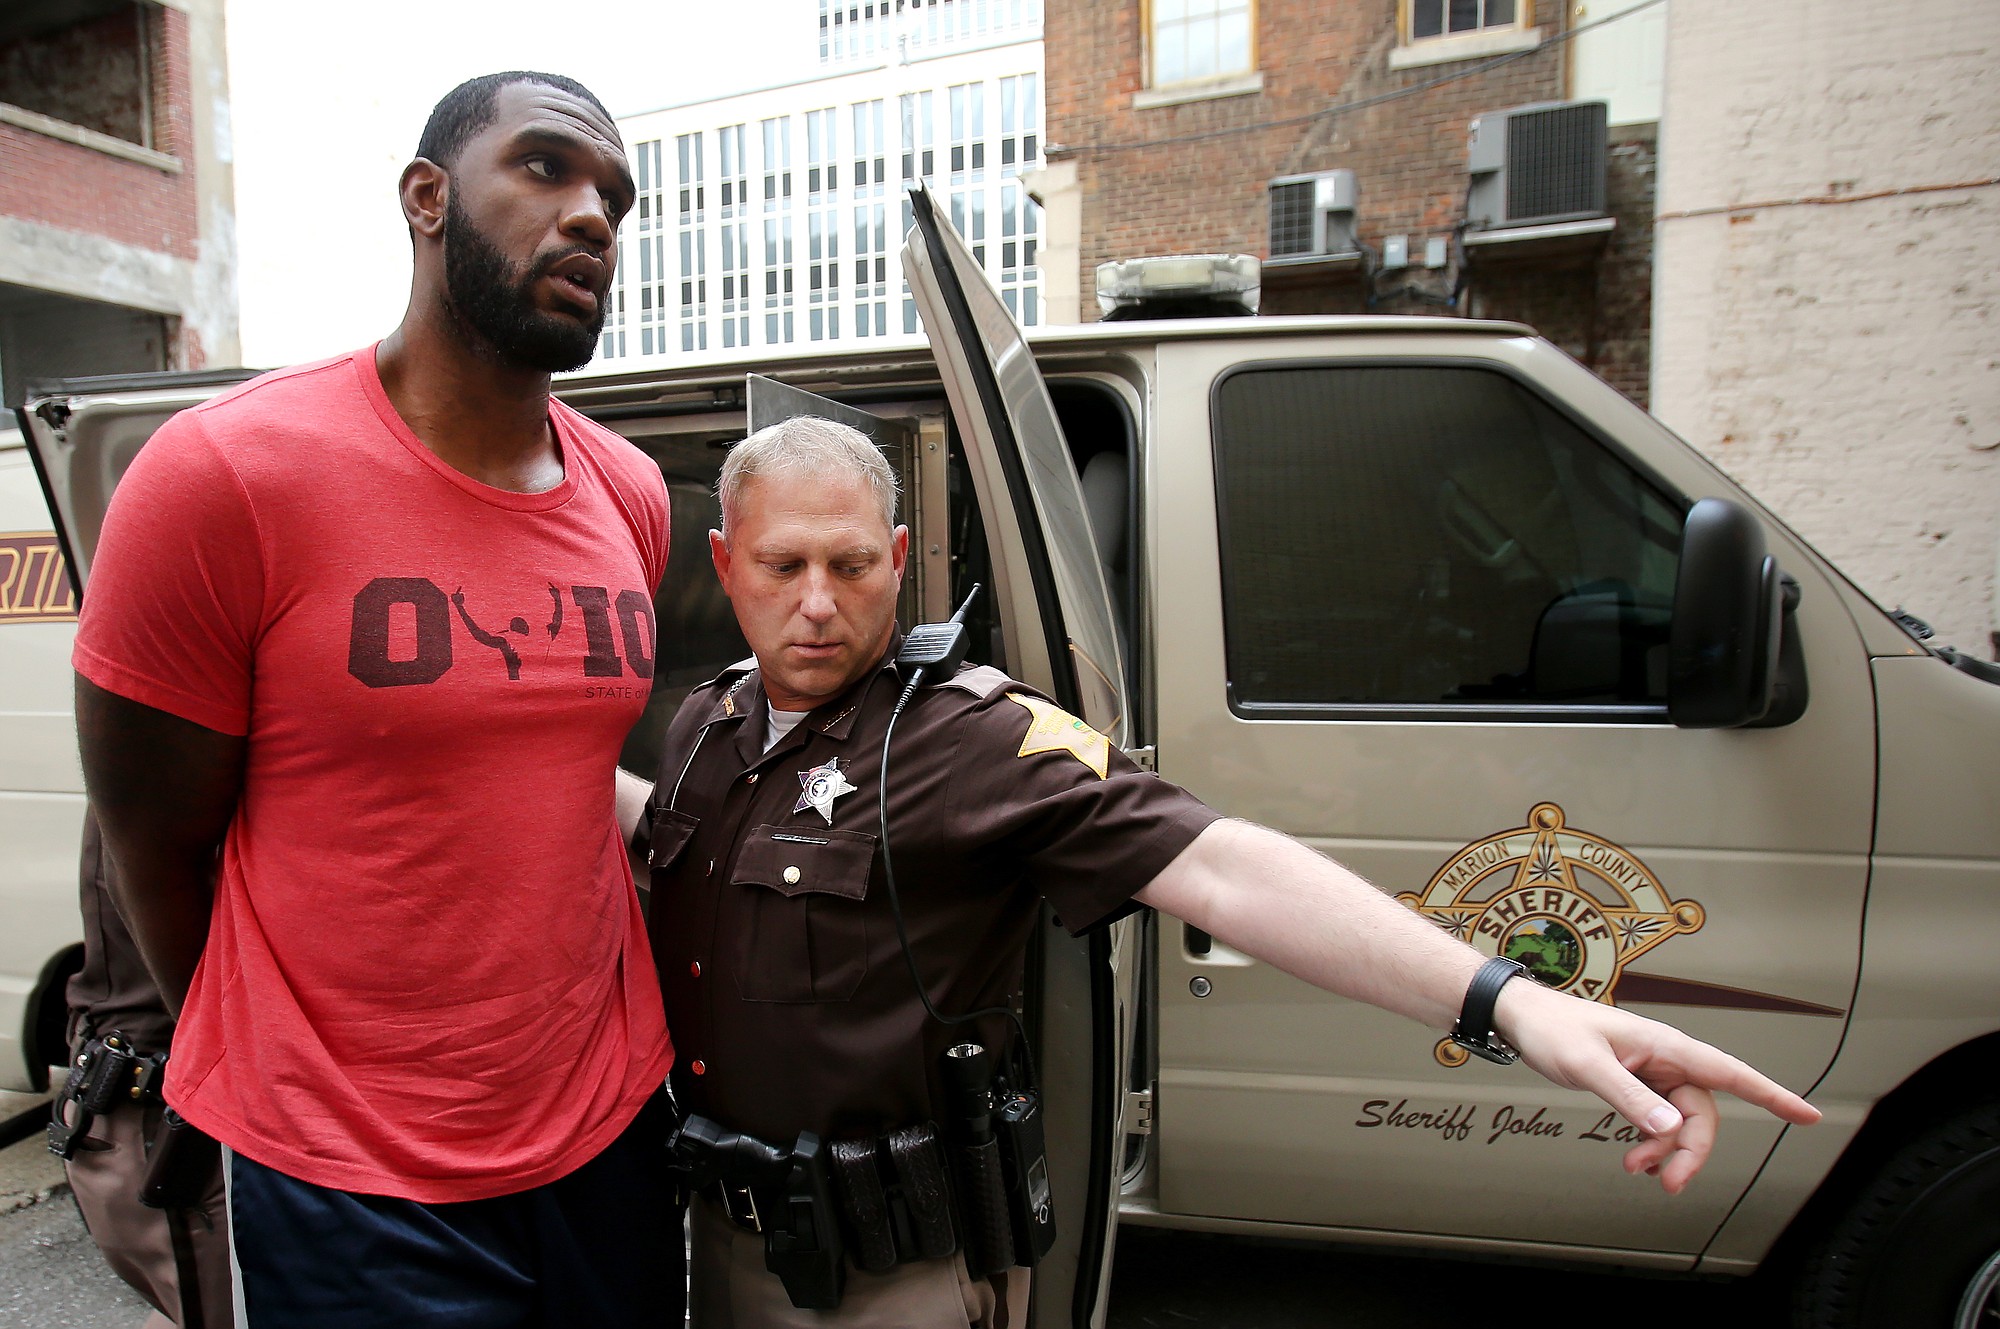 Greg Oden is escorted into the Marion County Community Corrections building, Thursday, Aug. 7, 2014, in Indianapolis. Police arrested former NBA No. 1 draft pick Greg Oden on battery charges early Thursday, alleging that he punched his ex-girlfriend in the face during a fight at his mother's suburban Indianapolis home.